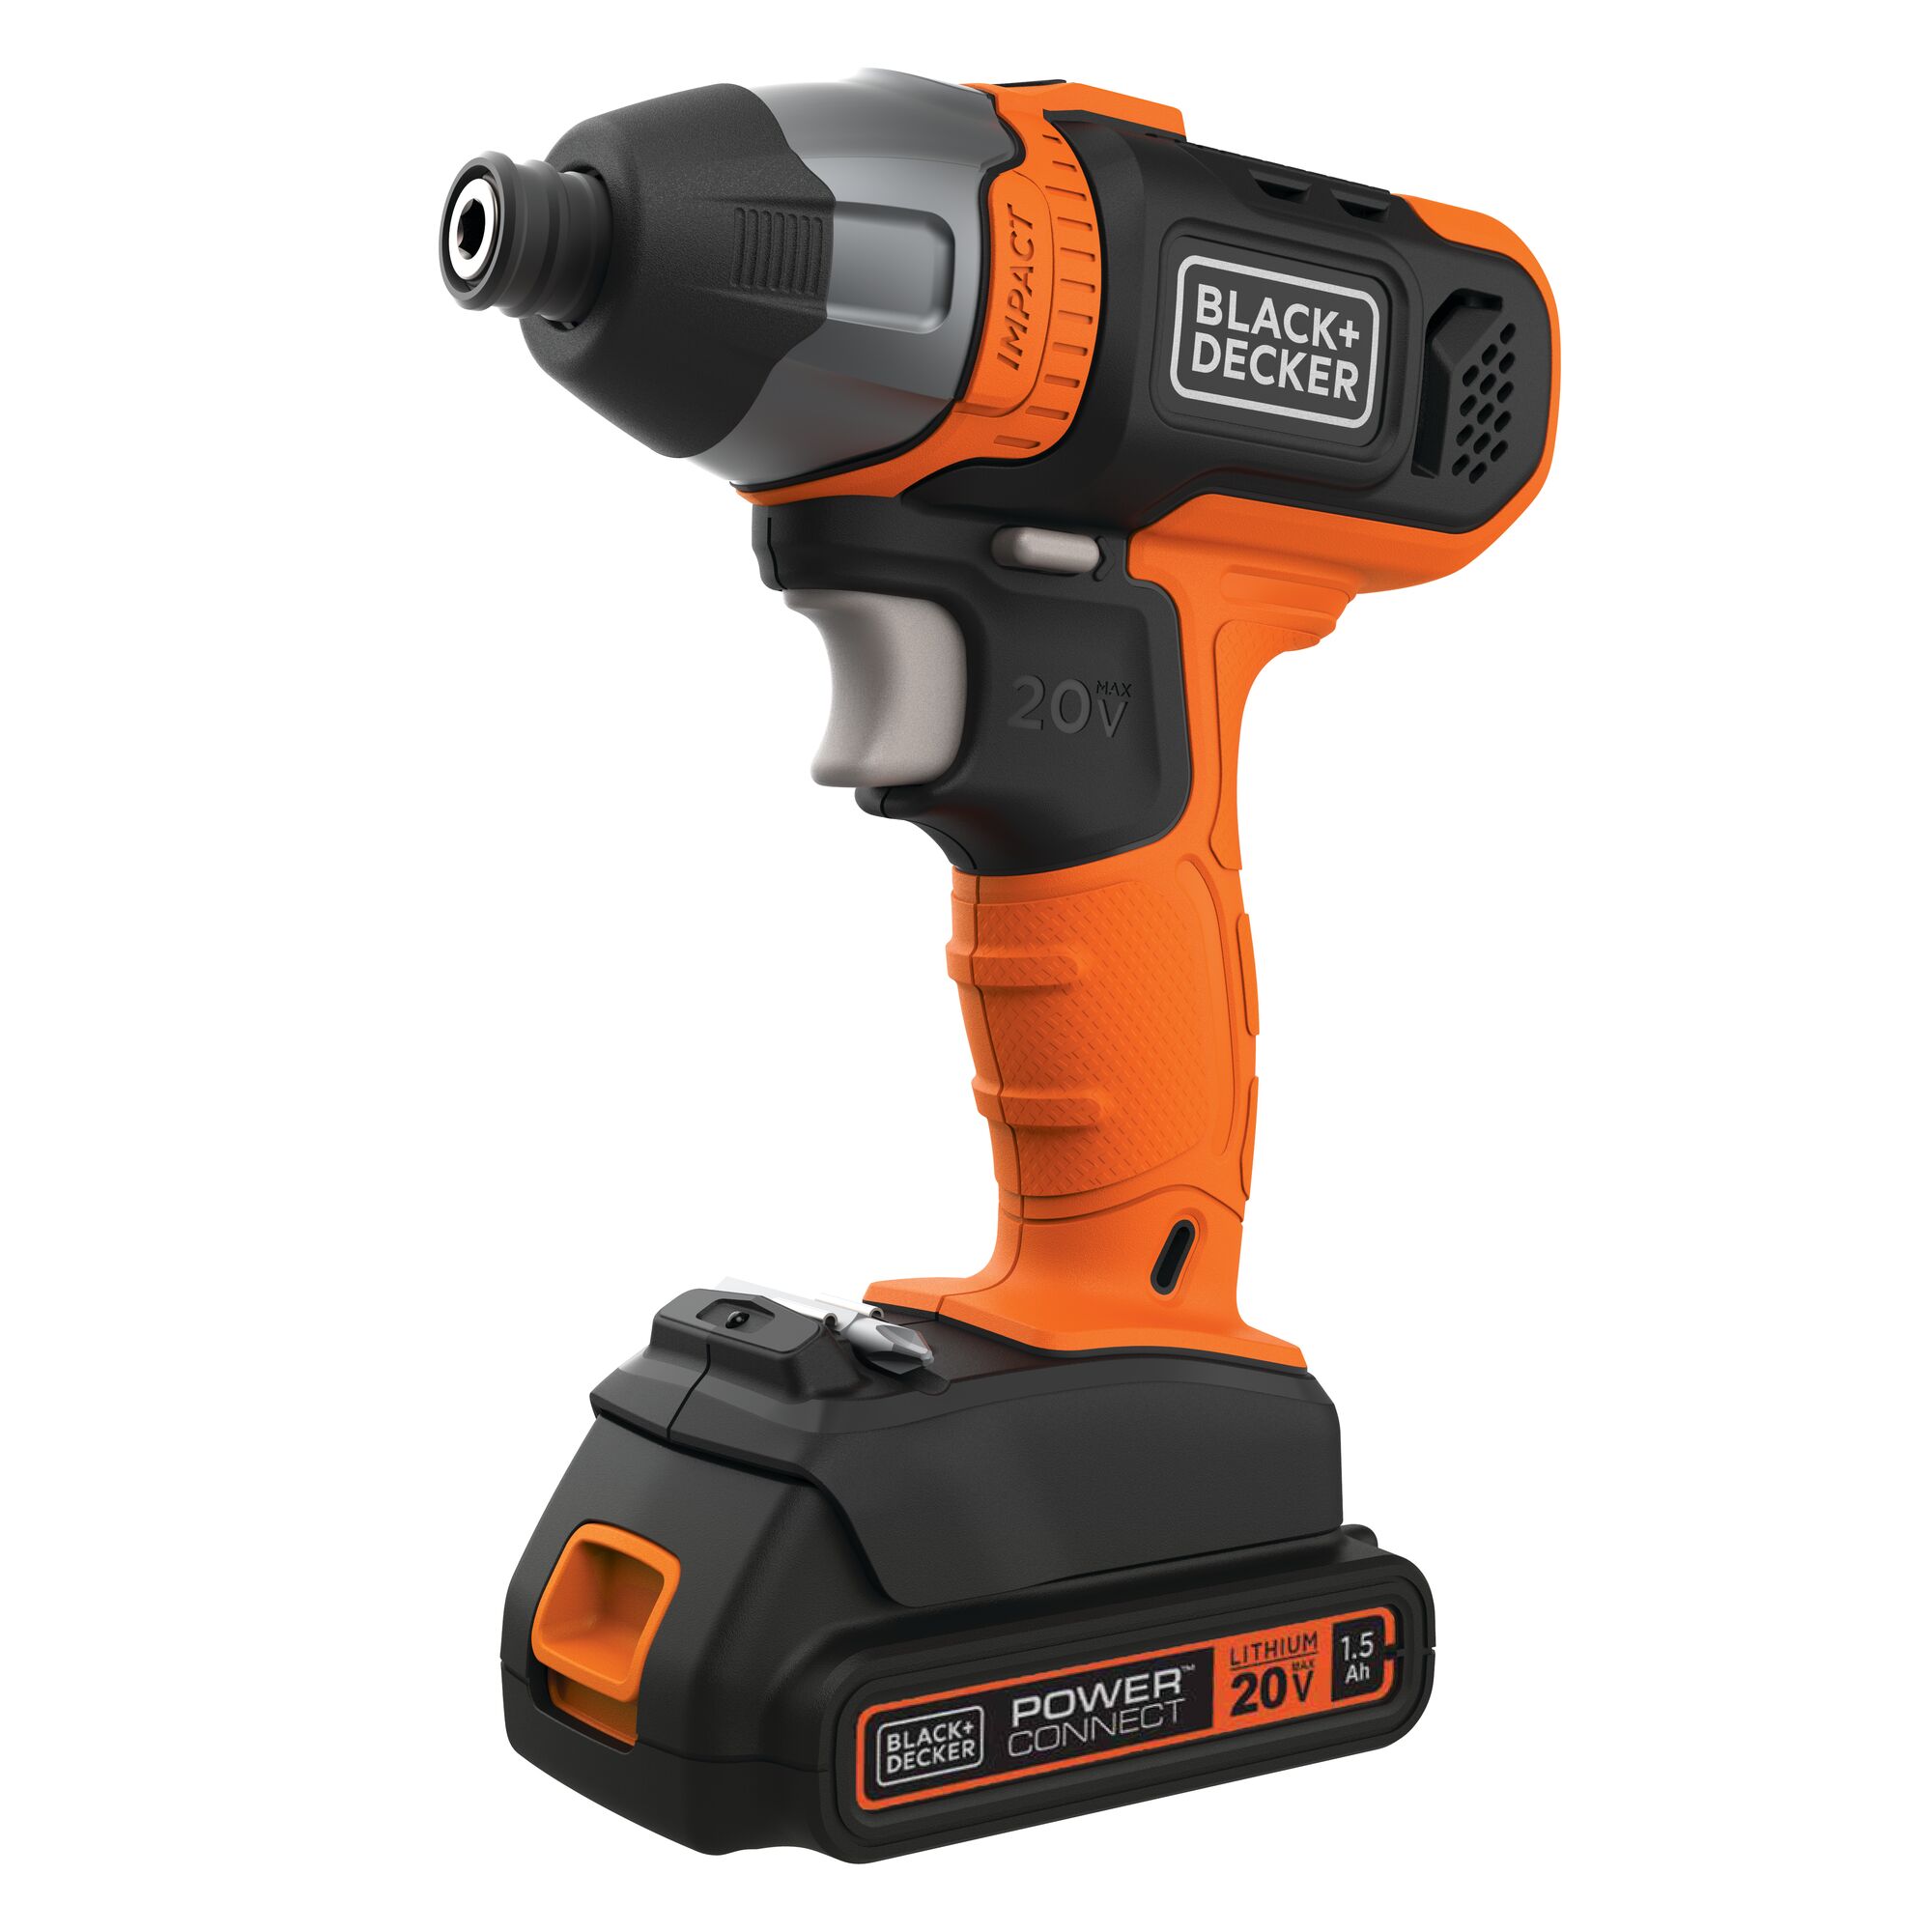 Lithium Impact Driver Battery and Charger Not Included.